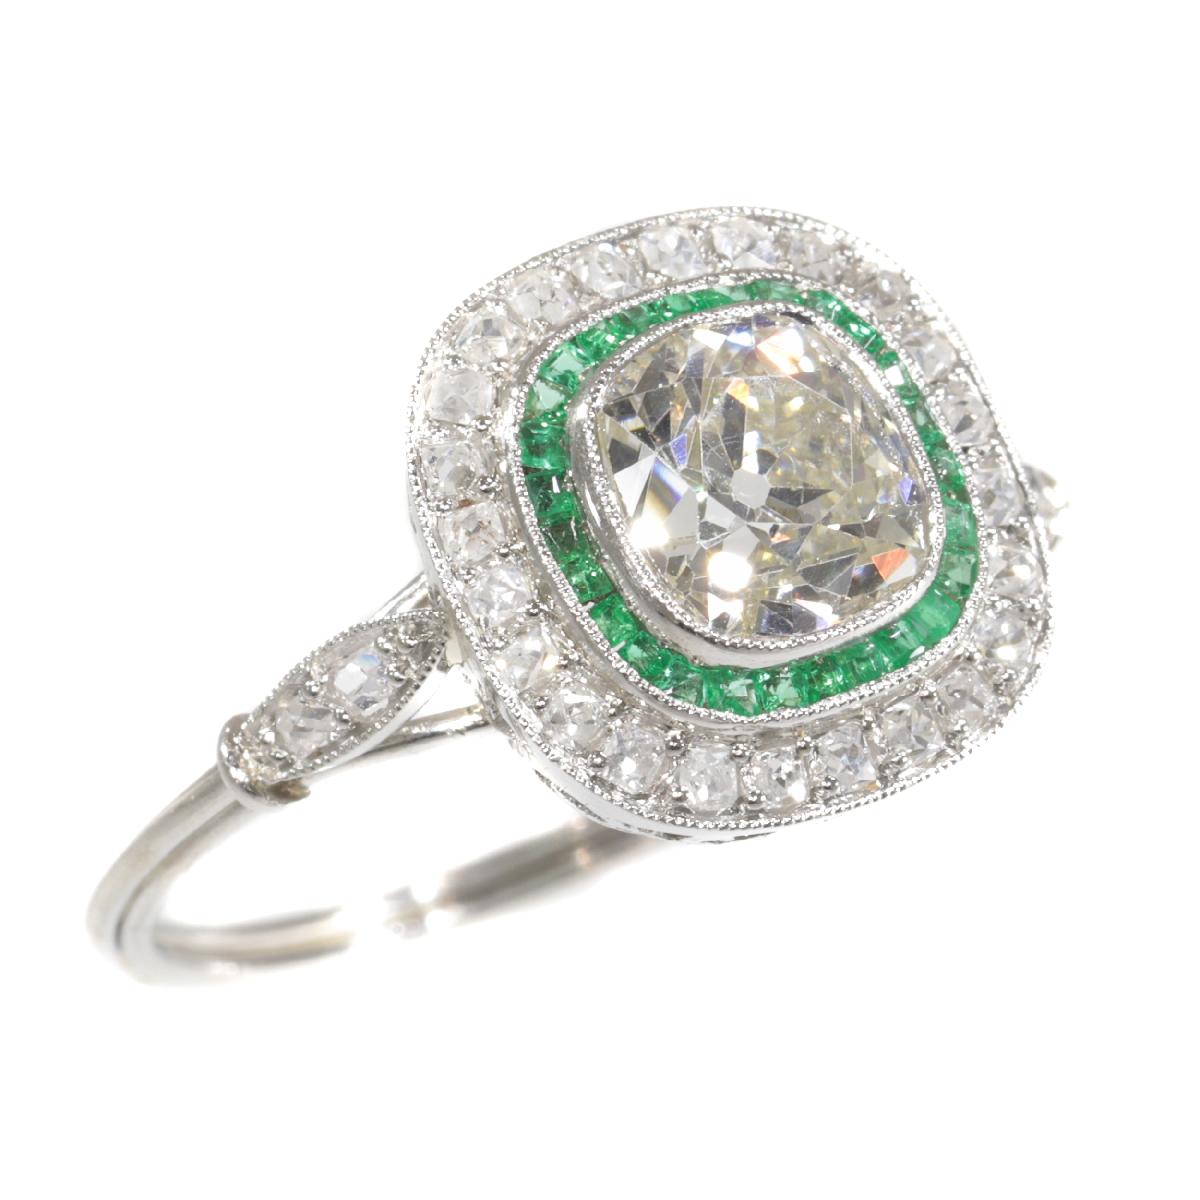 Vintage Art Deco Style Platinum Diamond and Emerald Engagement Ring, 1930s For Sale 4